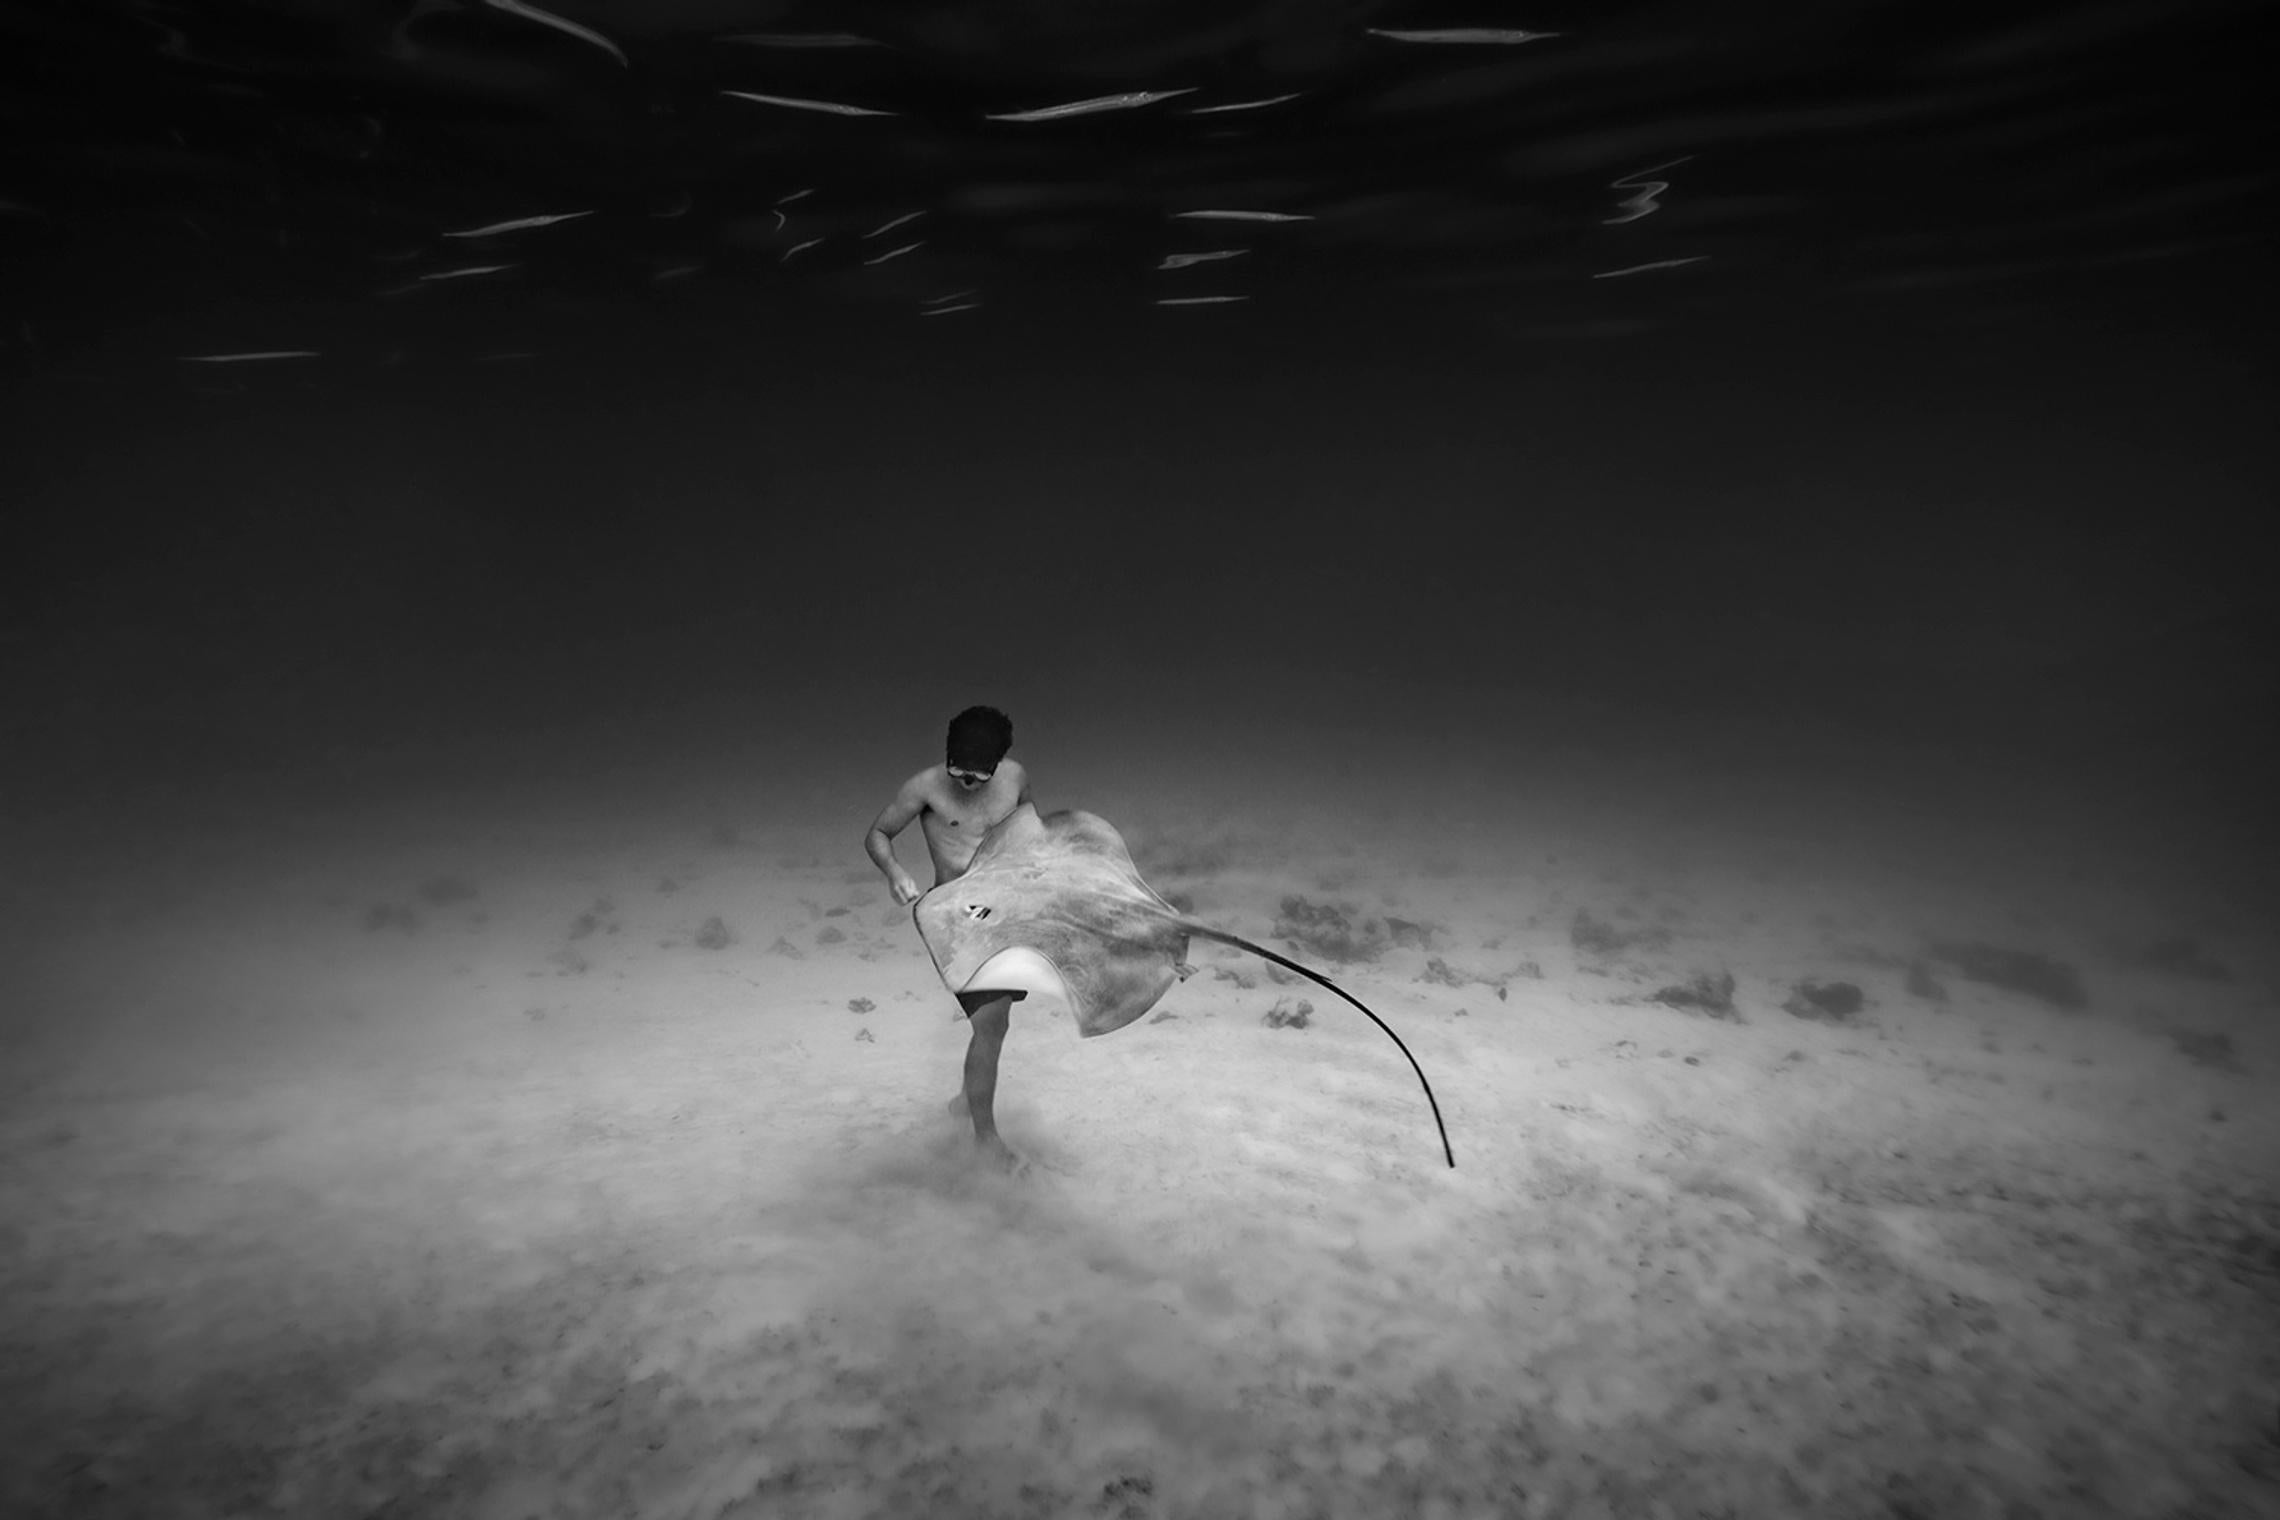 Cristina Mittermeier Black and White Photograph - Alone Together 